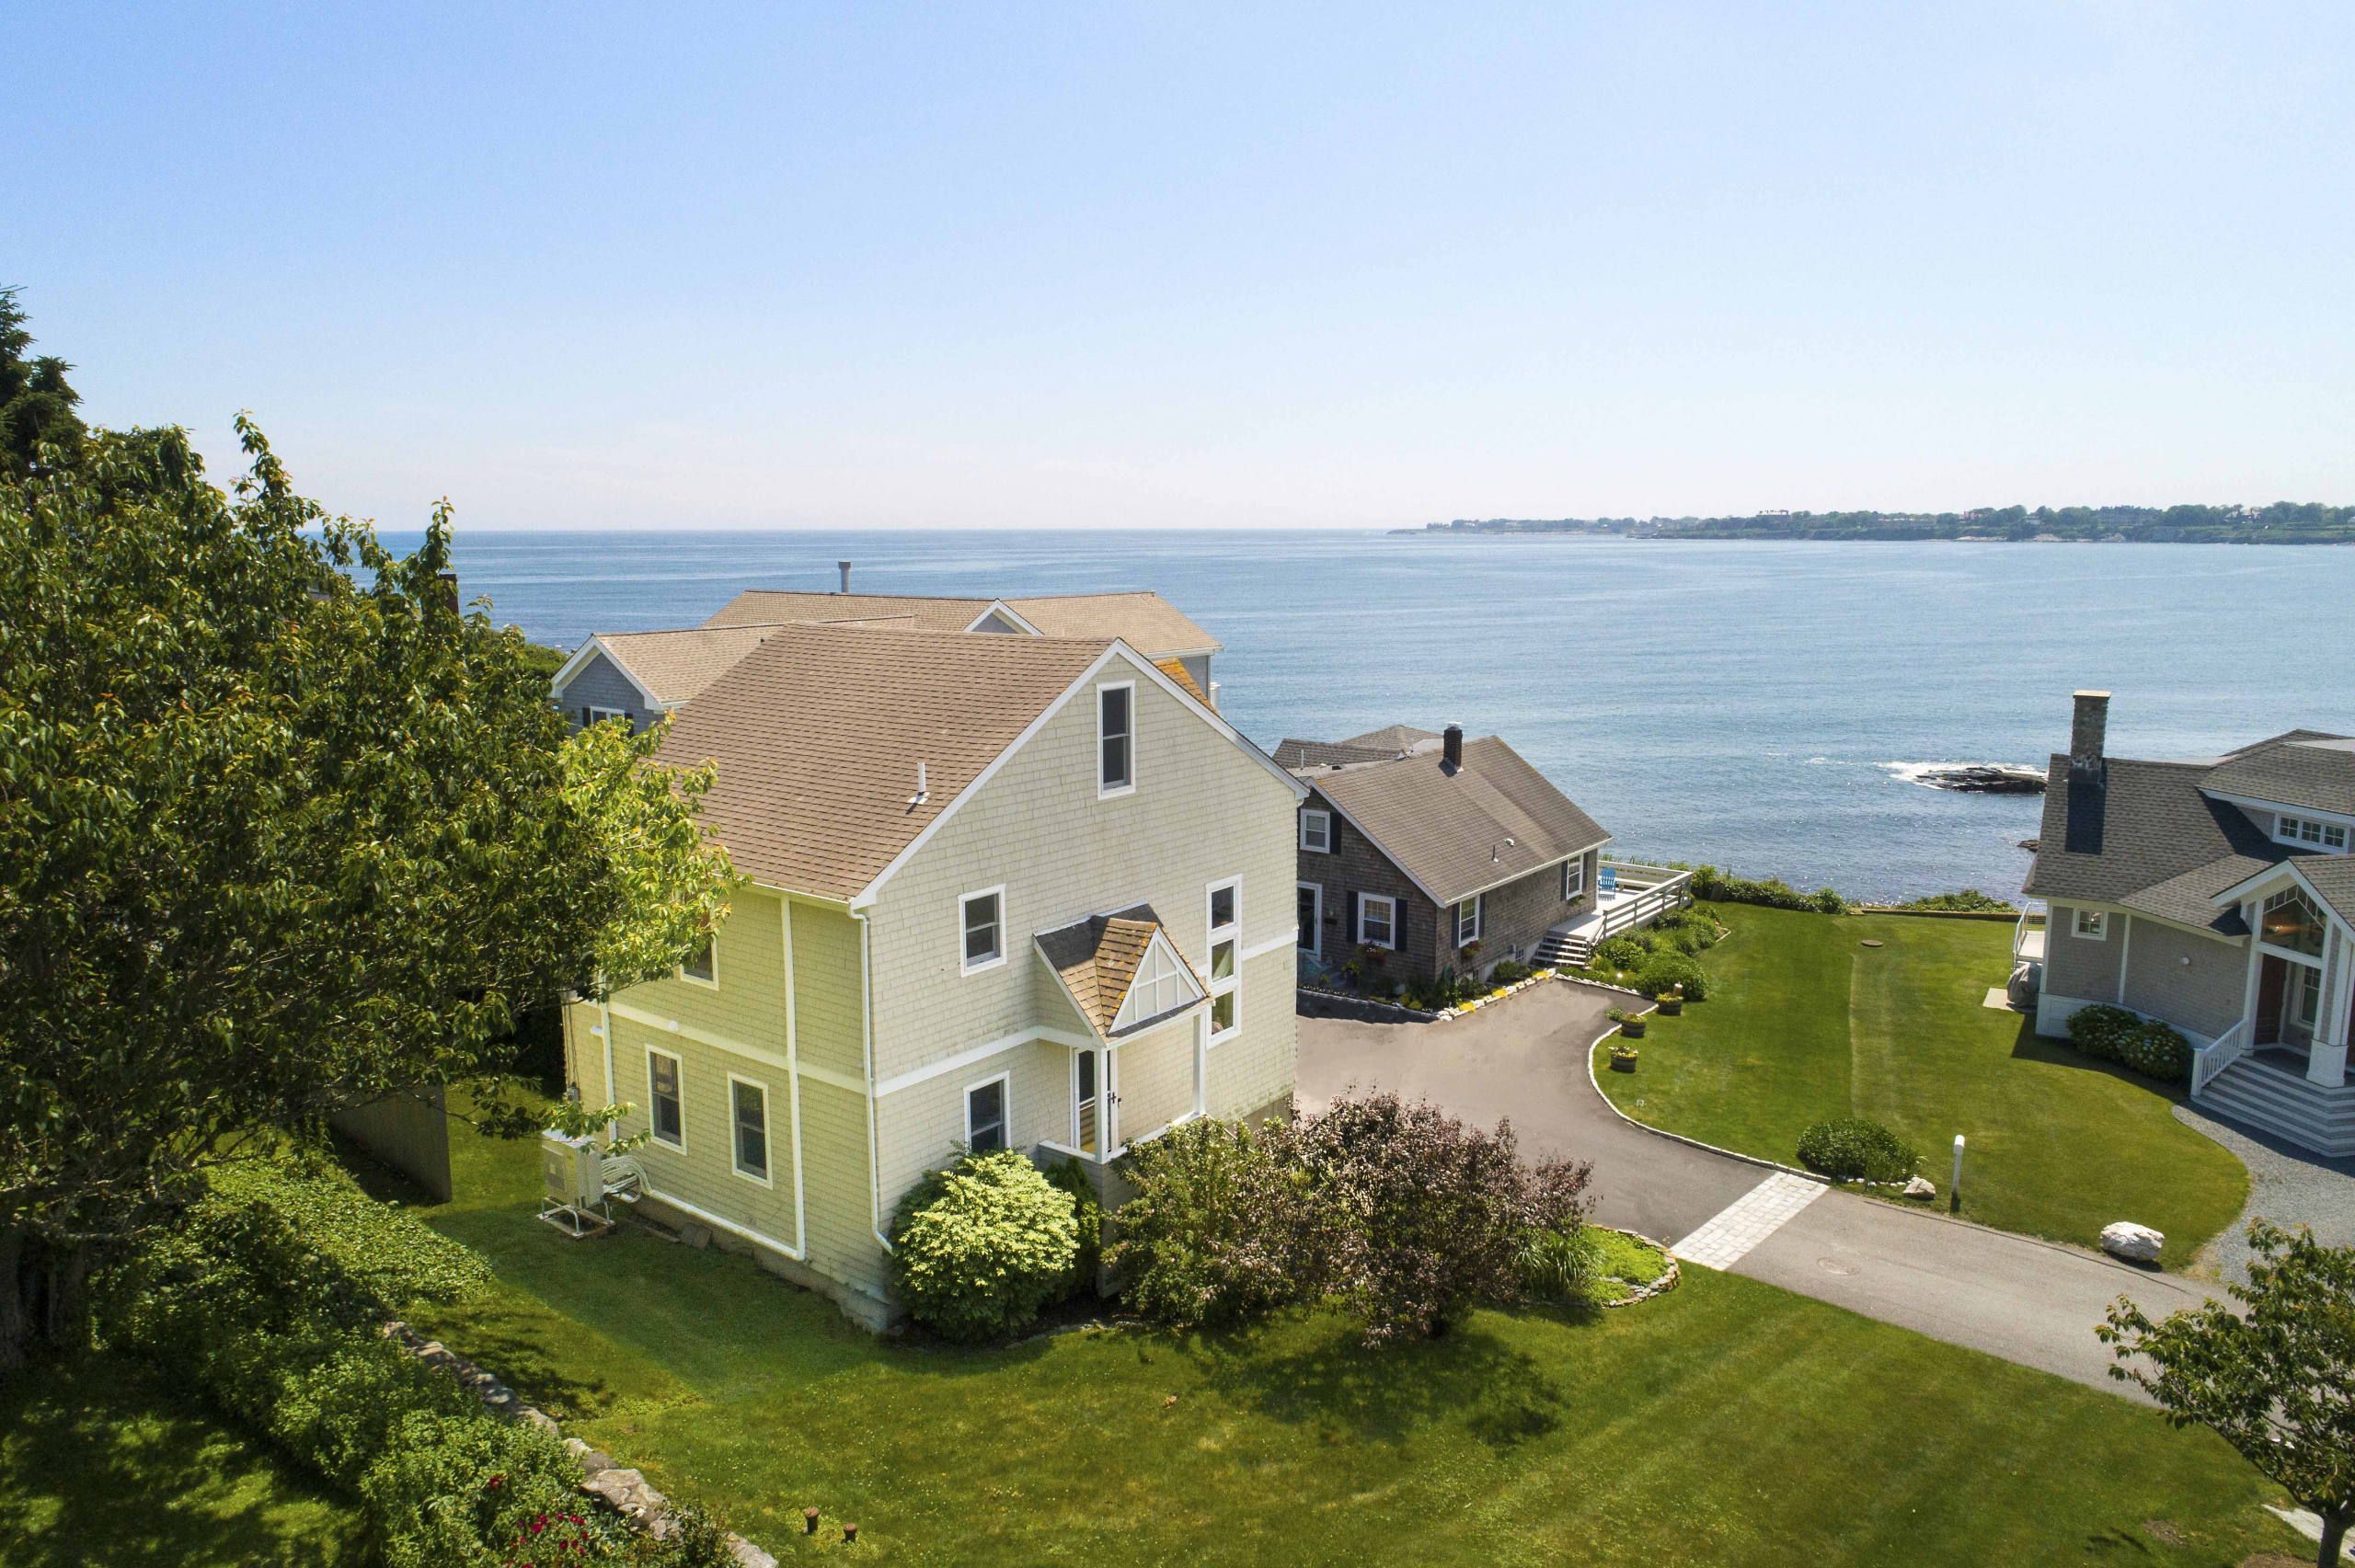 EASTON’S POINT CONTEMPORARY SELLS FOR $1.210M WITH ERIC KIRTON OF LILA DELMAN REAL ESTATE ON BOTH SIDES OF THE TRANSACTION